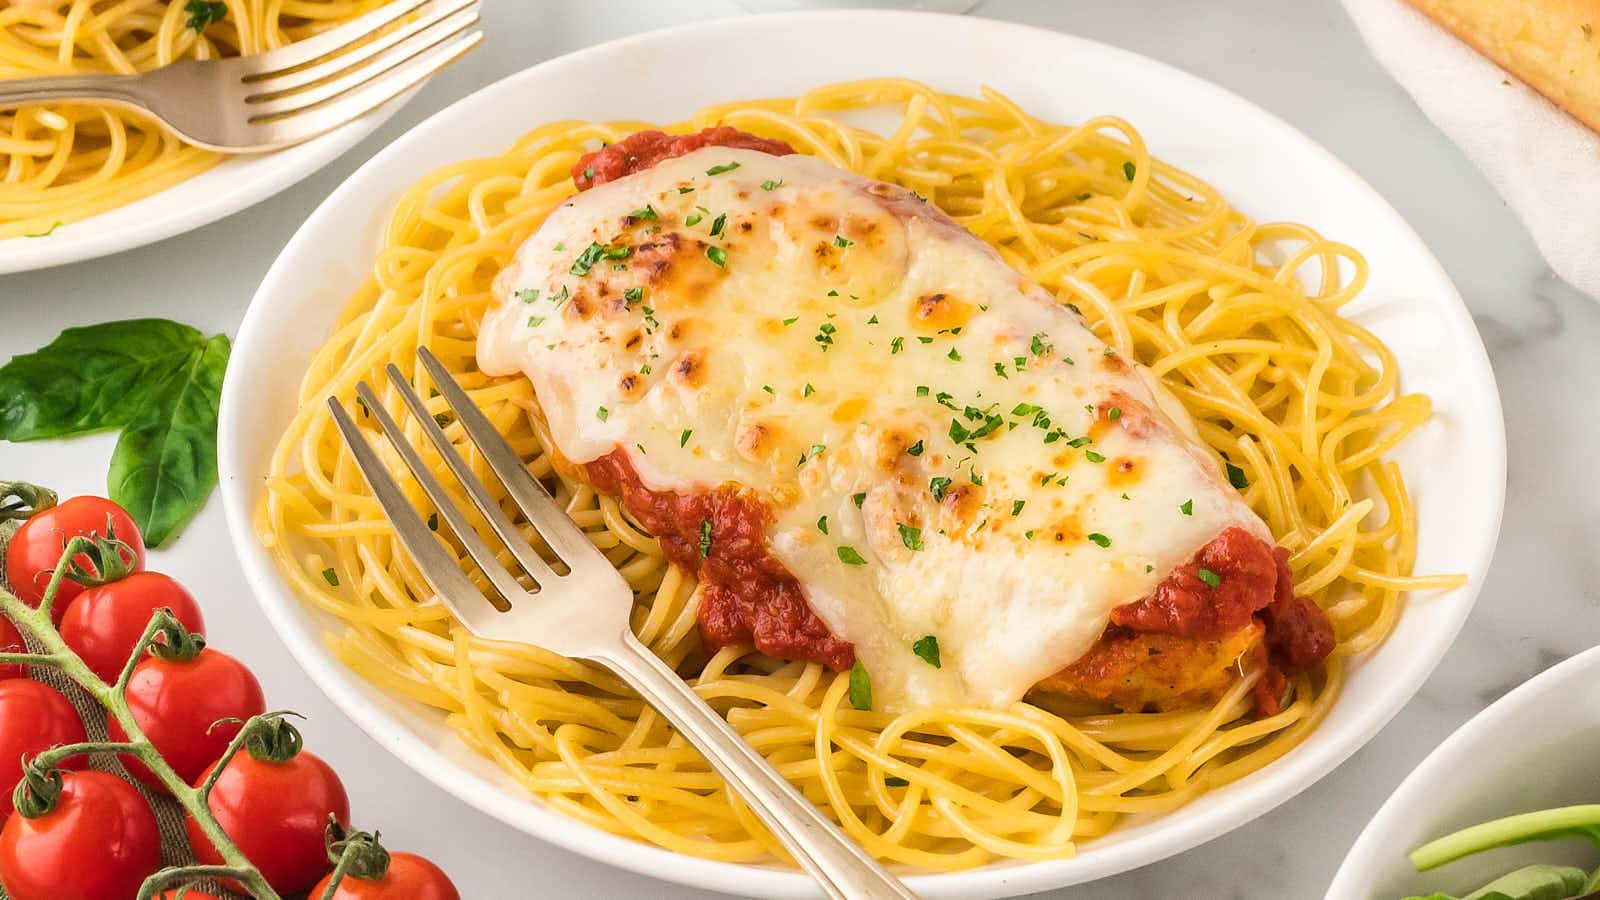 Cheesy Chicken Parmesan recipe by Cheerful Cook.